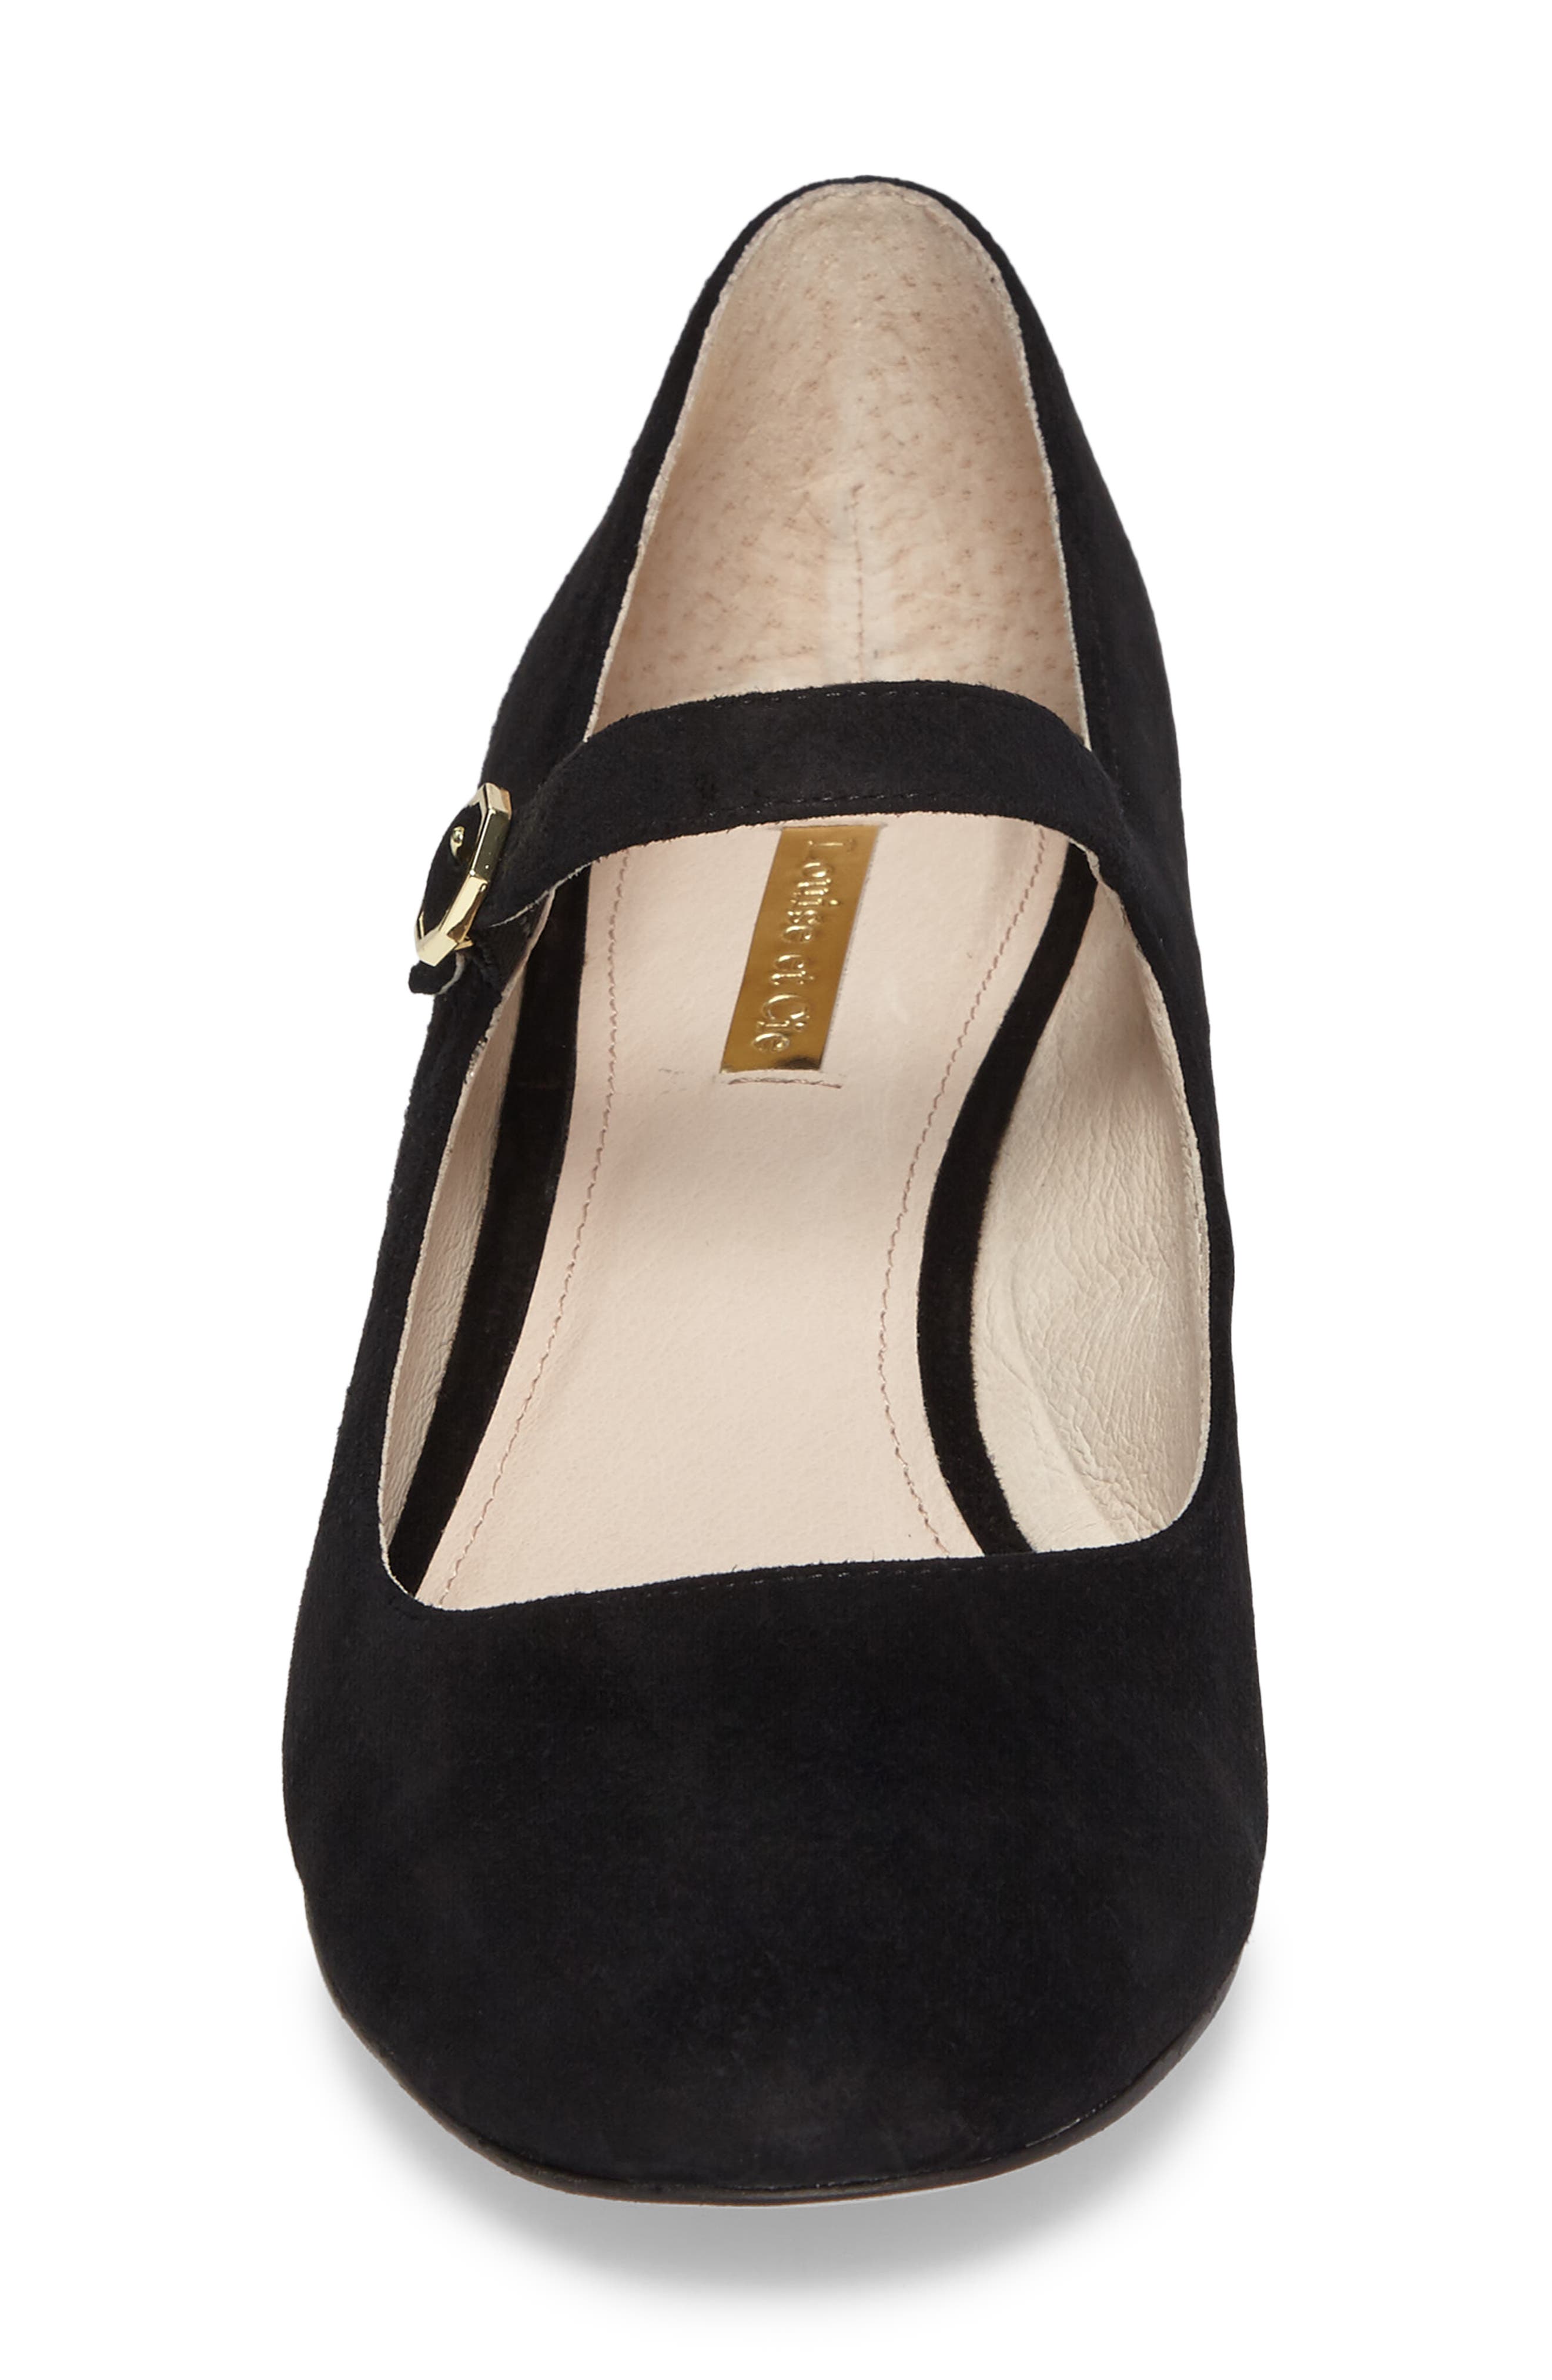 louise et cie mary jane shoes